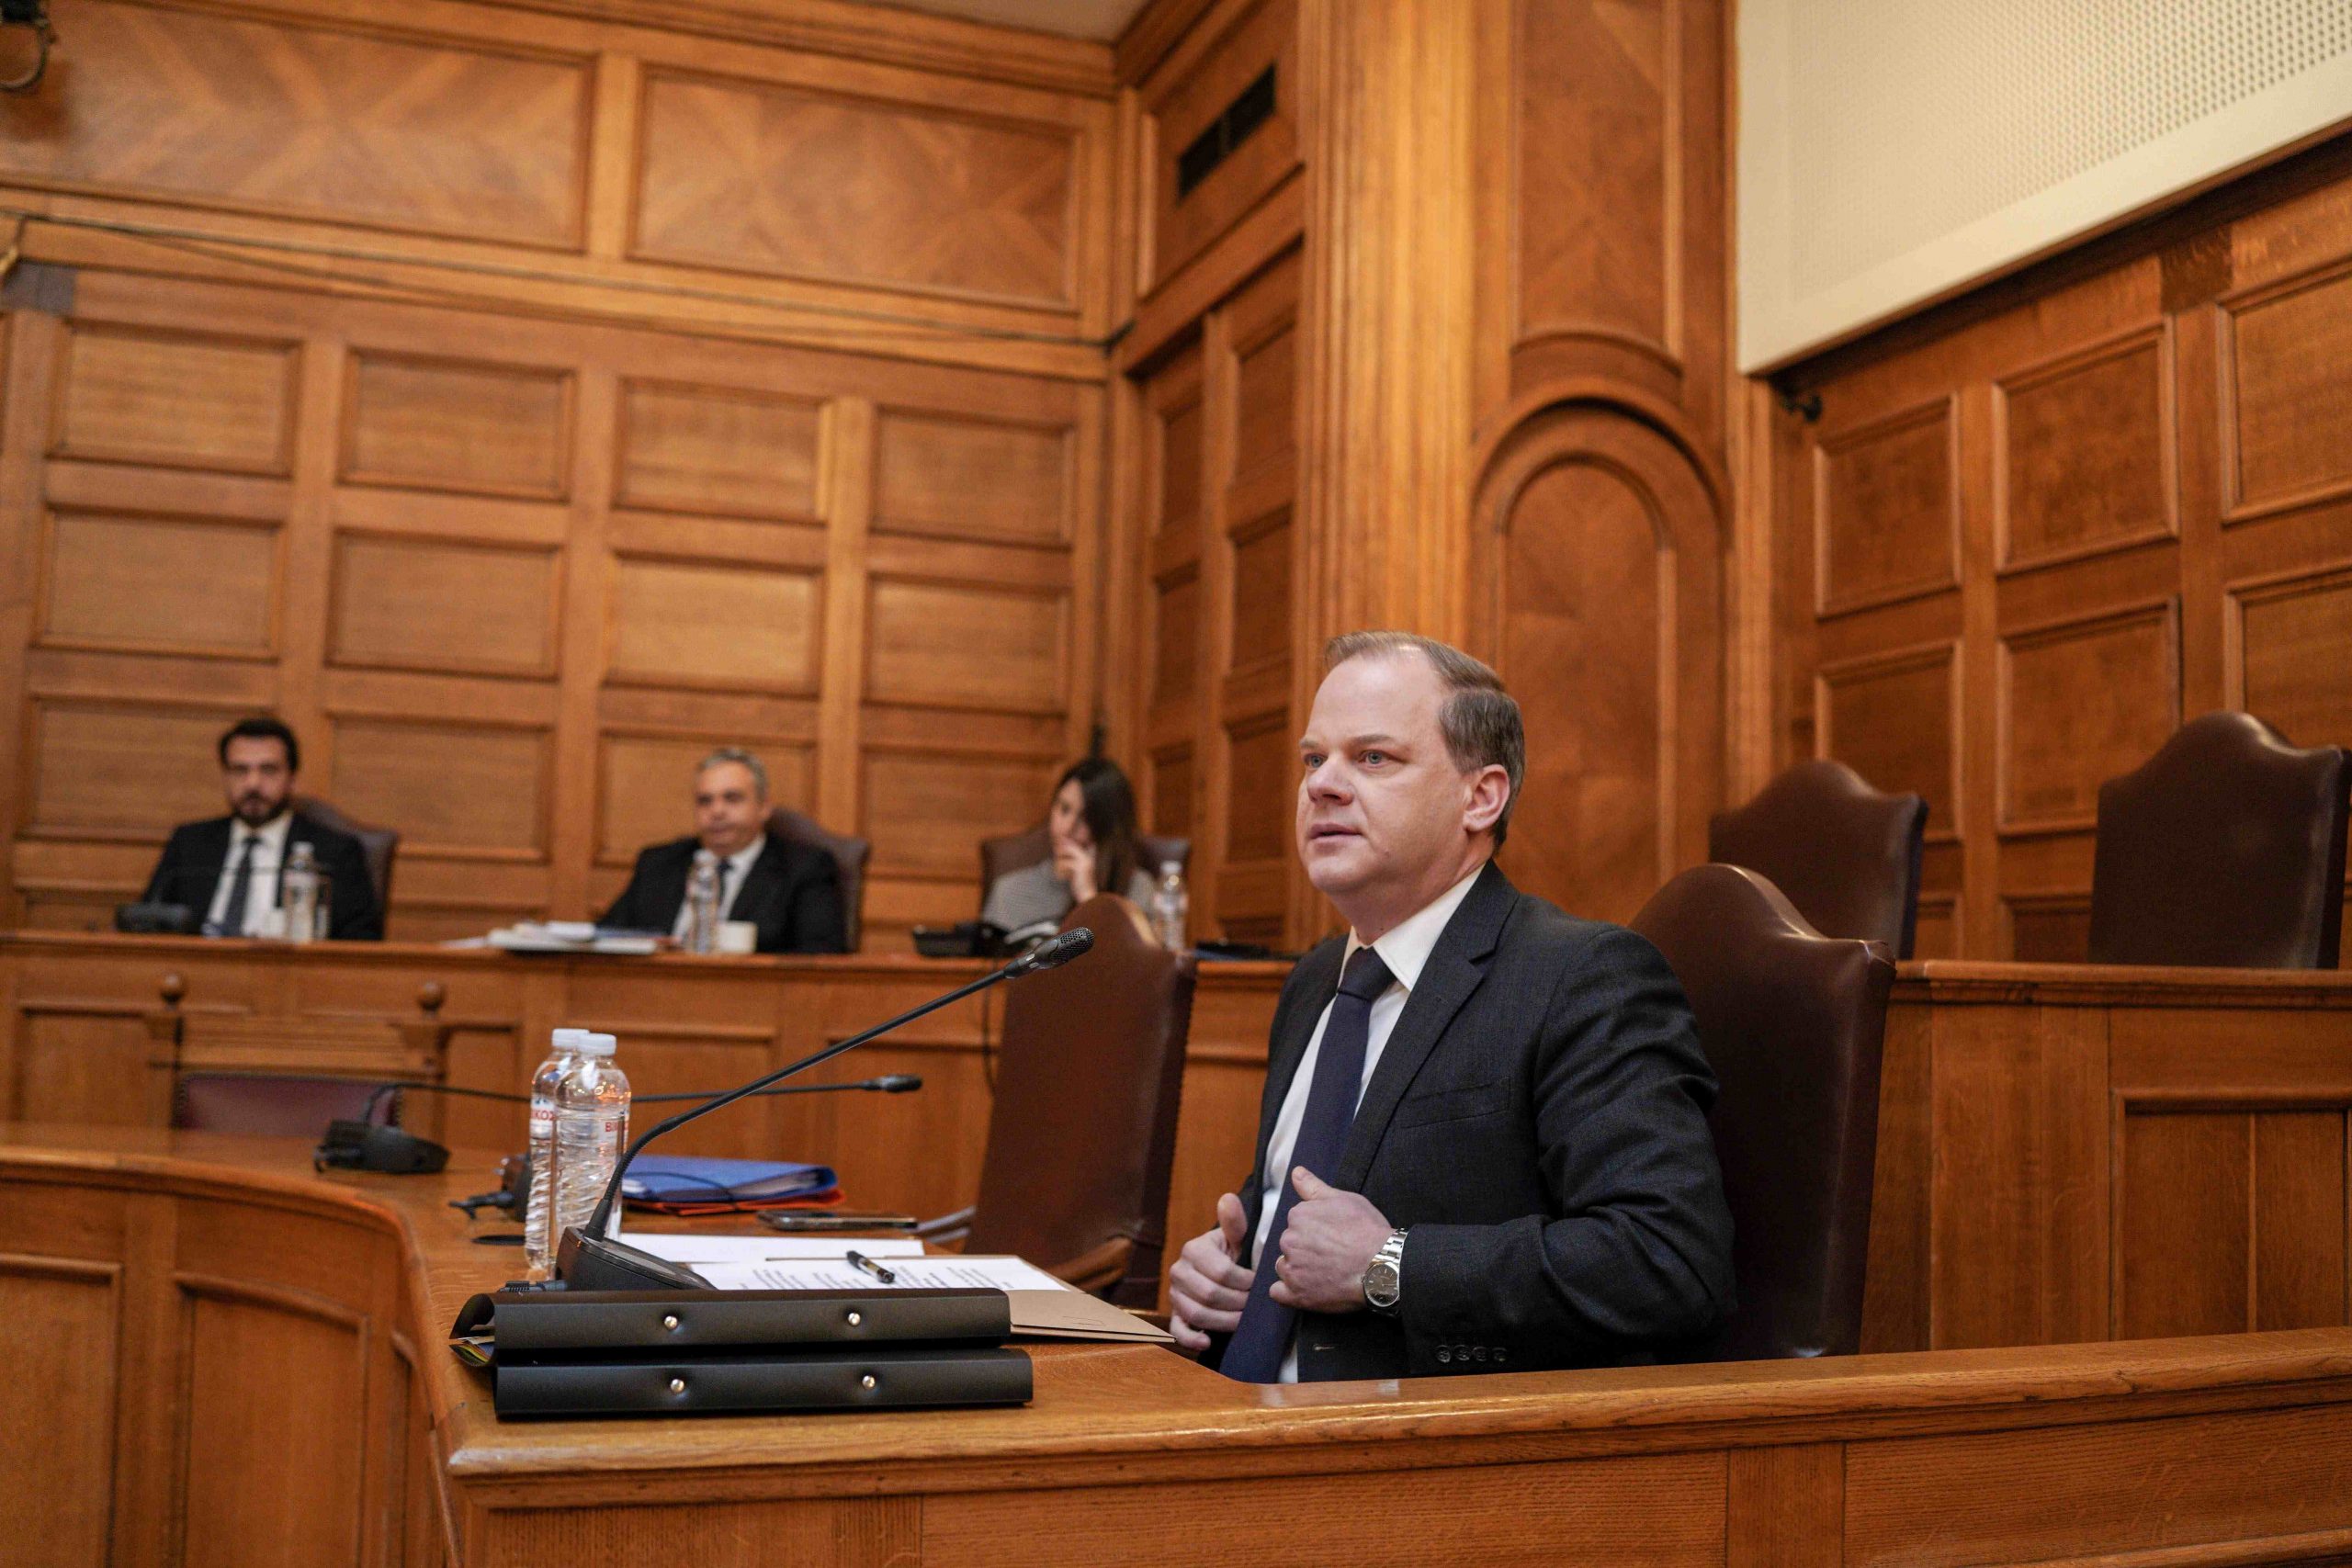 Tempi-Karamanlis: If Rules were Followed, Disaster Would Have Been Avoided